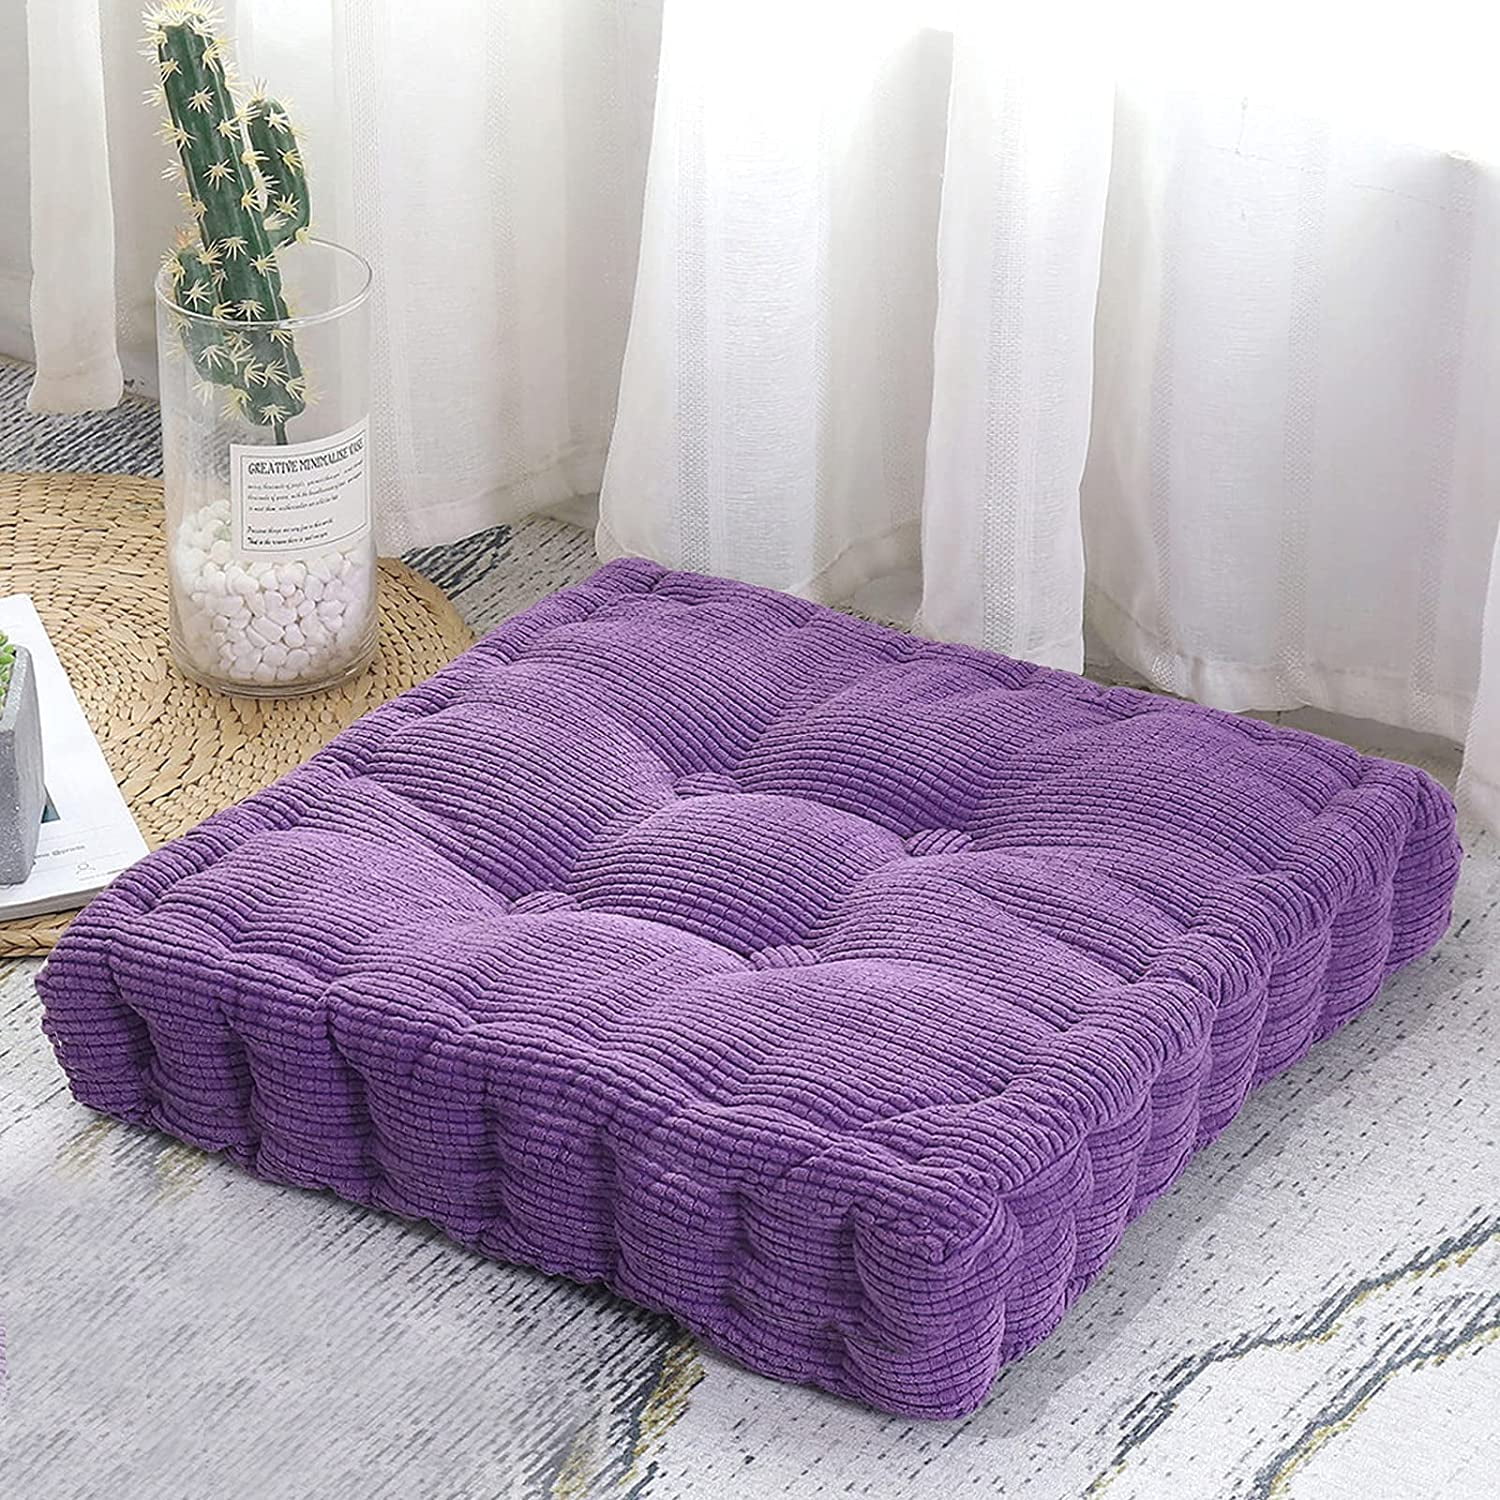 Travelwant Large Floor Pillows,Square Meditation Pillow,Microsuede Sitting Pillows Floor Cushion for Yoga Living Room Balcony Office Outdoor, Purple